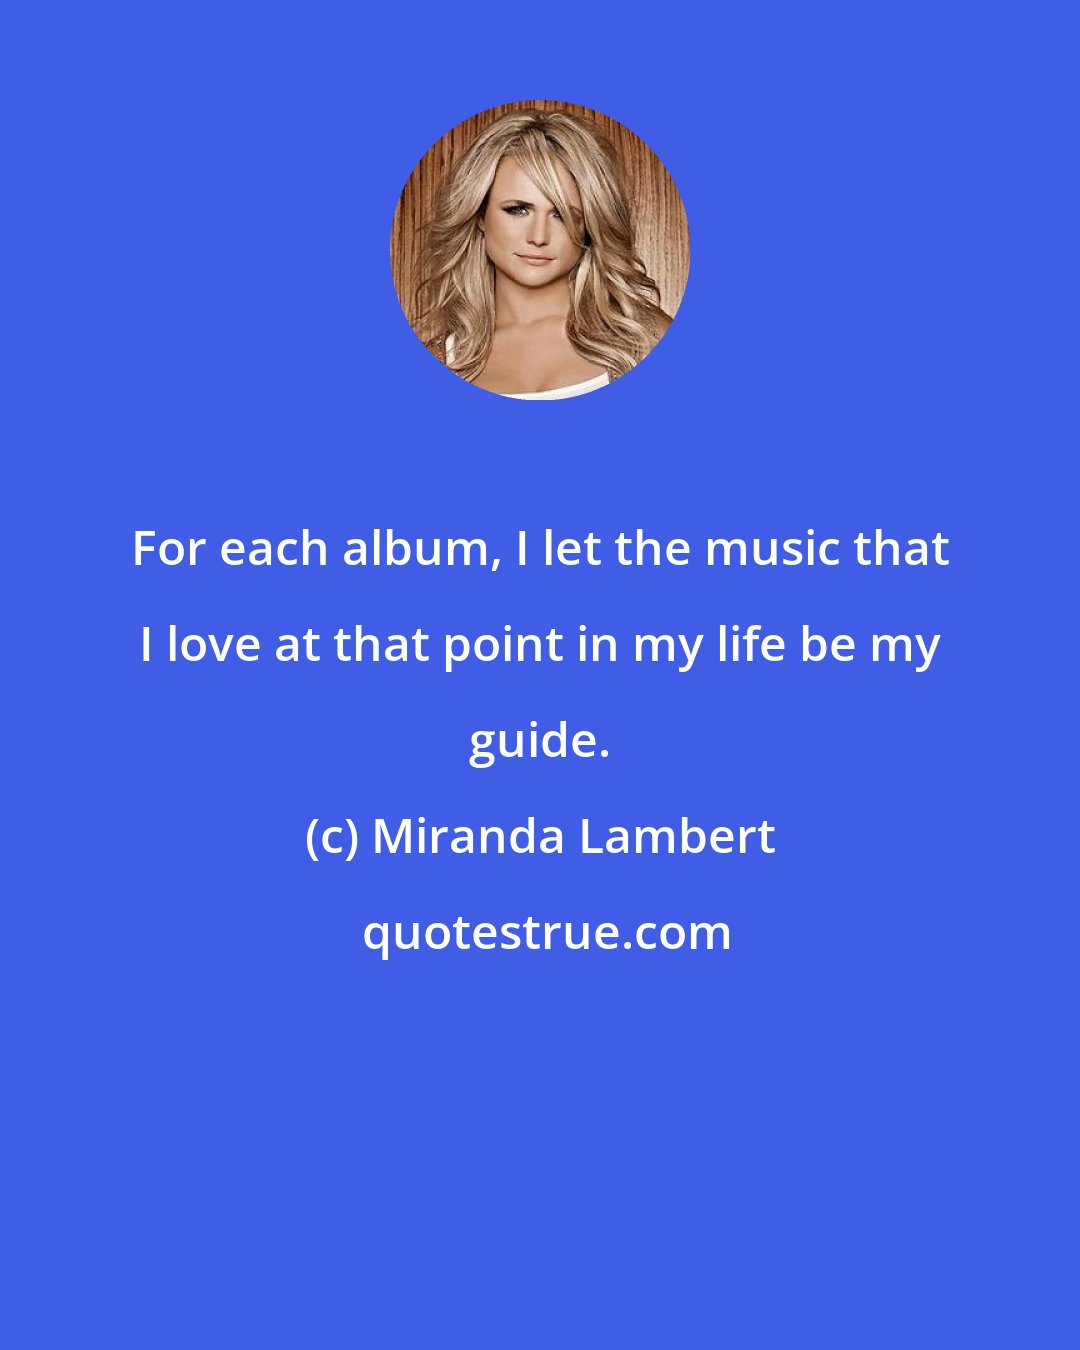 Miranda Lambert: For each album, I let the music that I love at that point in my life be my guide.